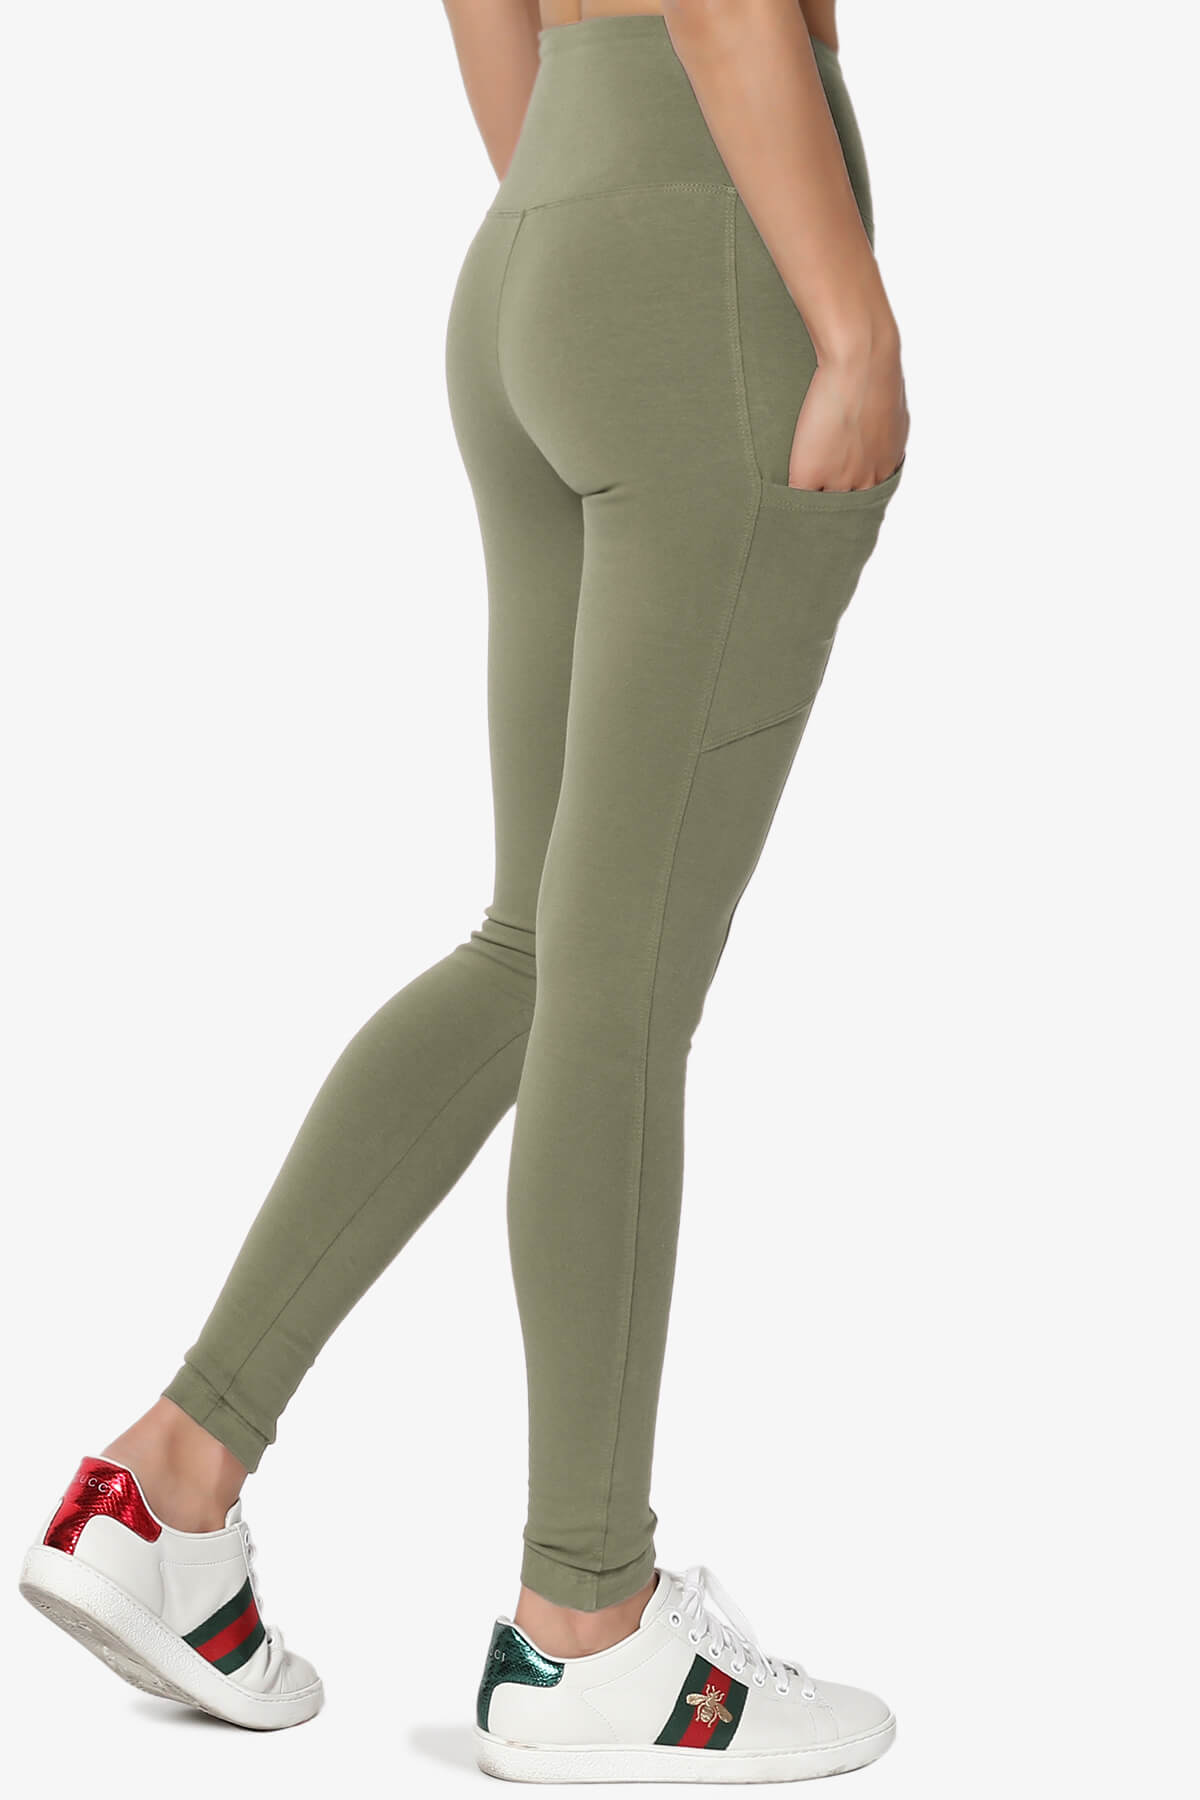 Ansley Luxe Cotton Leggings with Pockets DUSTY OLIVE_4